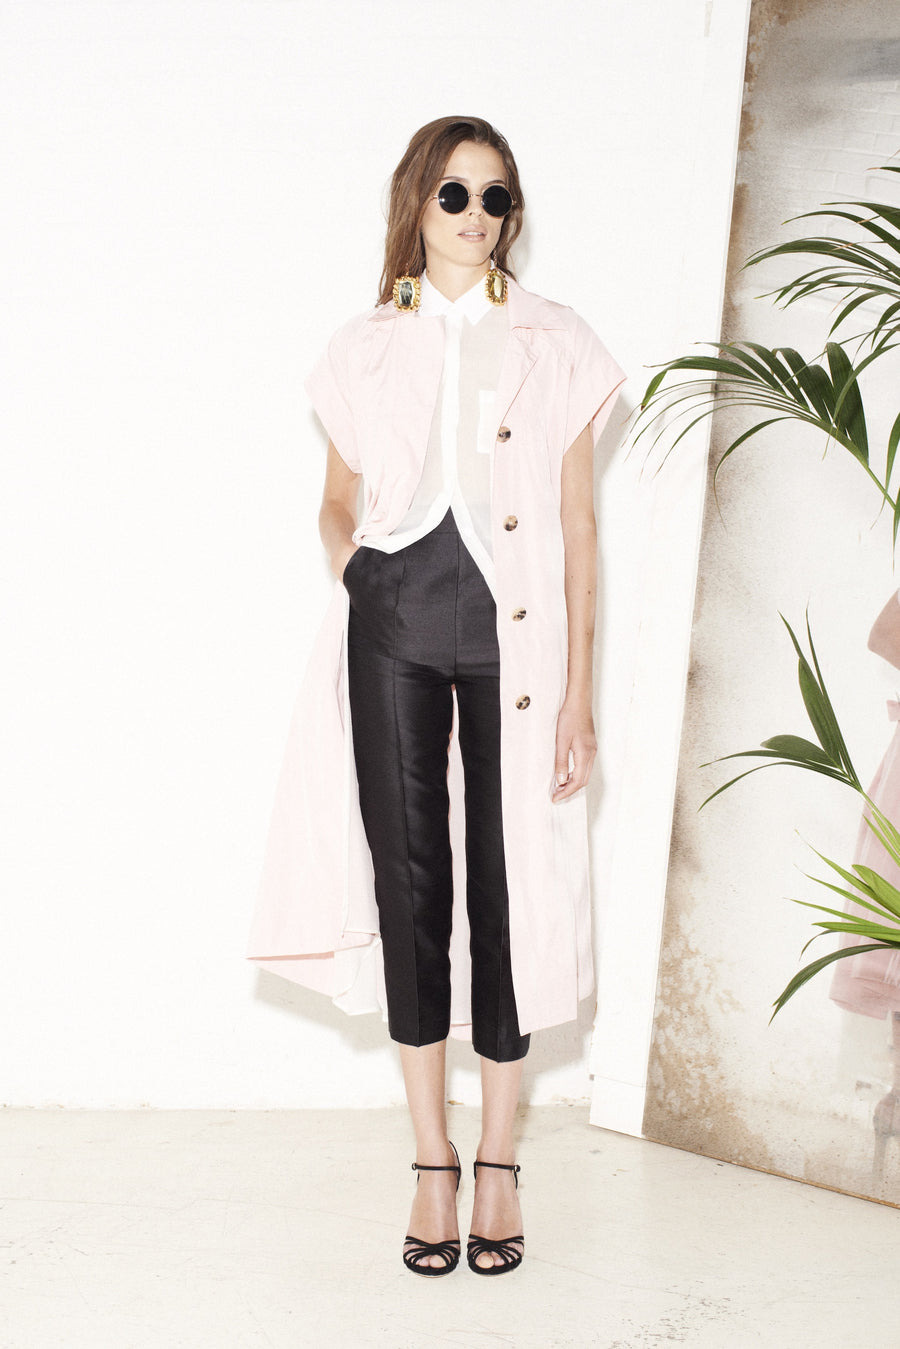 SS2013 / Look 13